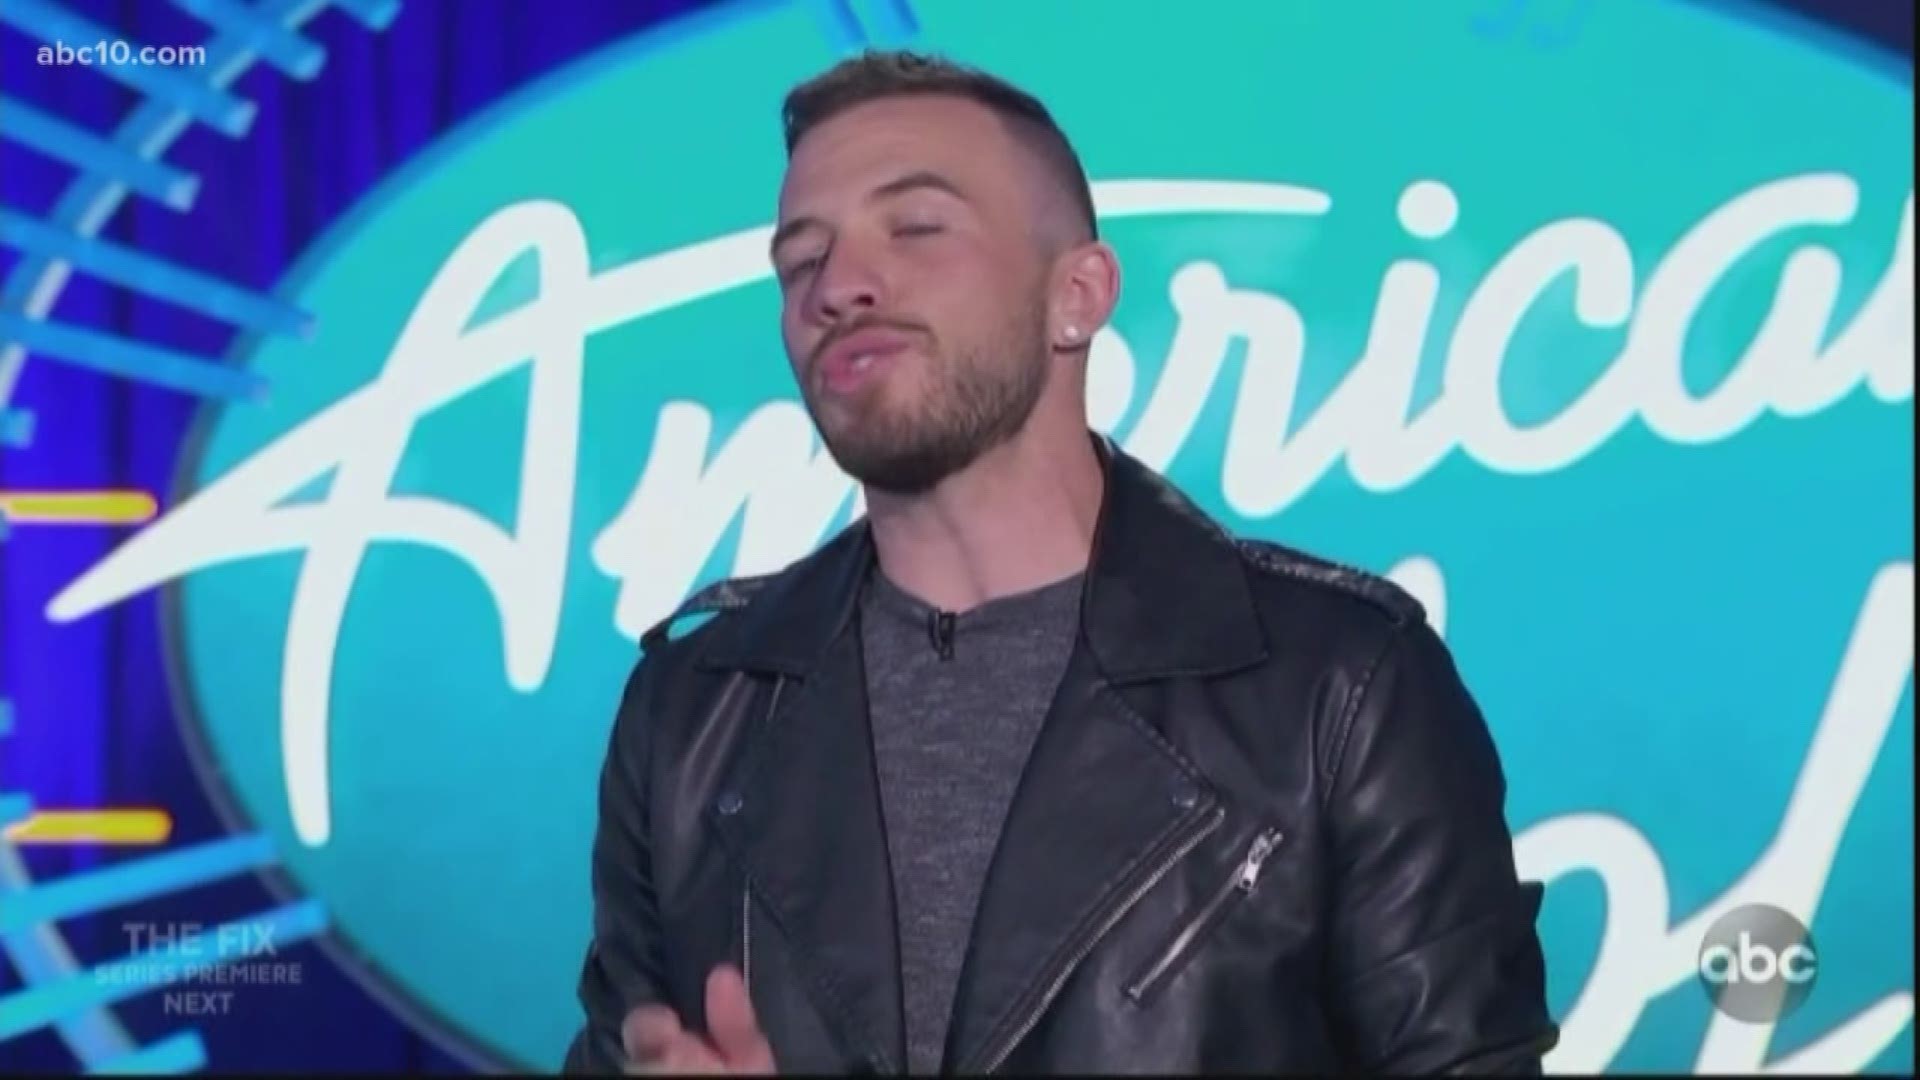 Judges did not pick Modesto native Ryan Modesto to move on to the next round of American Idol, but his time on the show sparked hometown pride. He spoke with ABC10 about his experience and what’s coming up next for him.